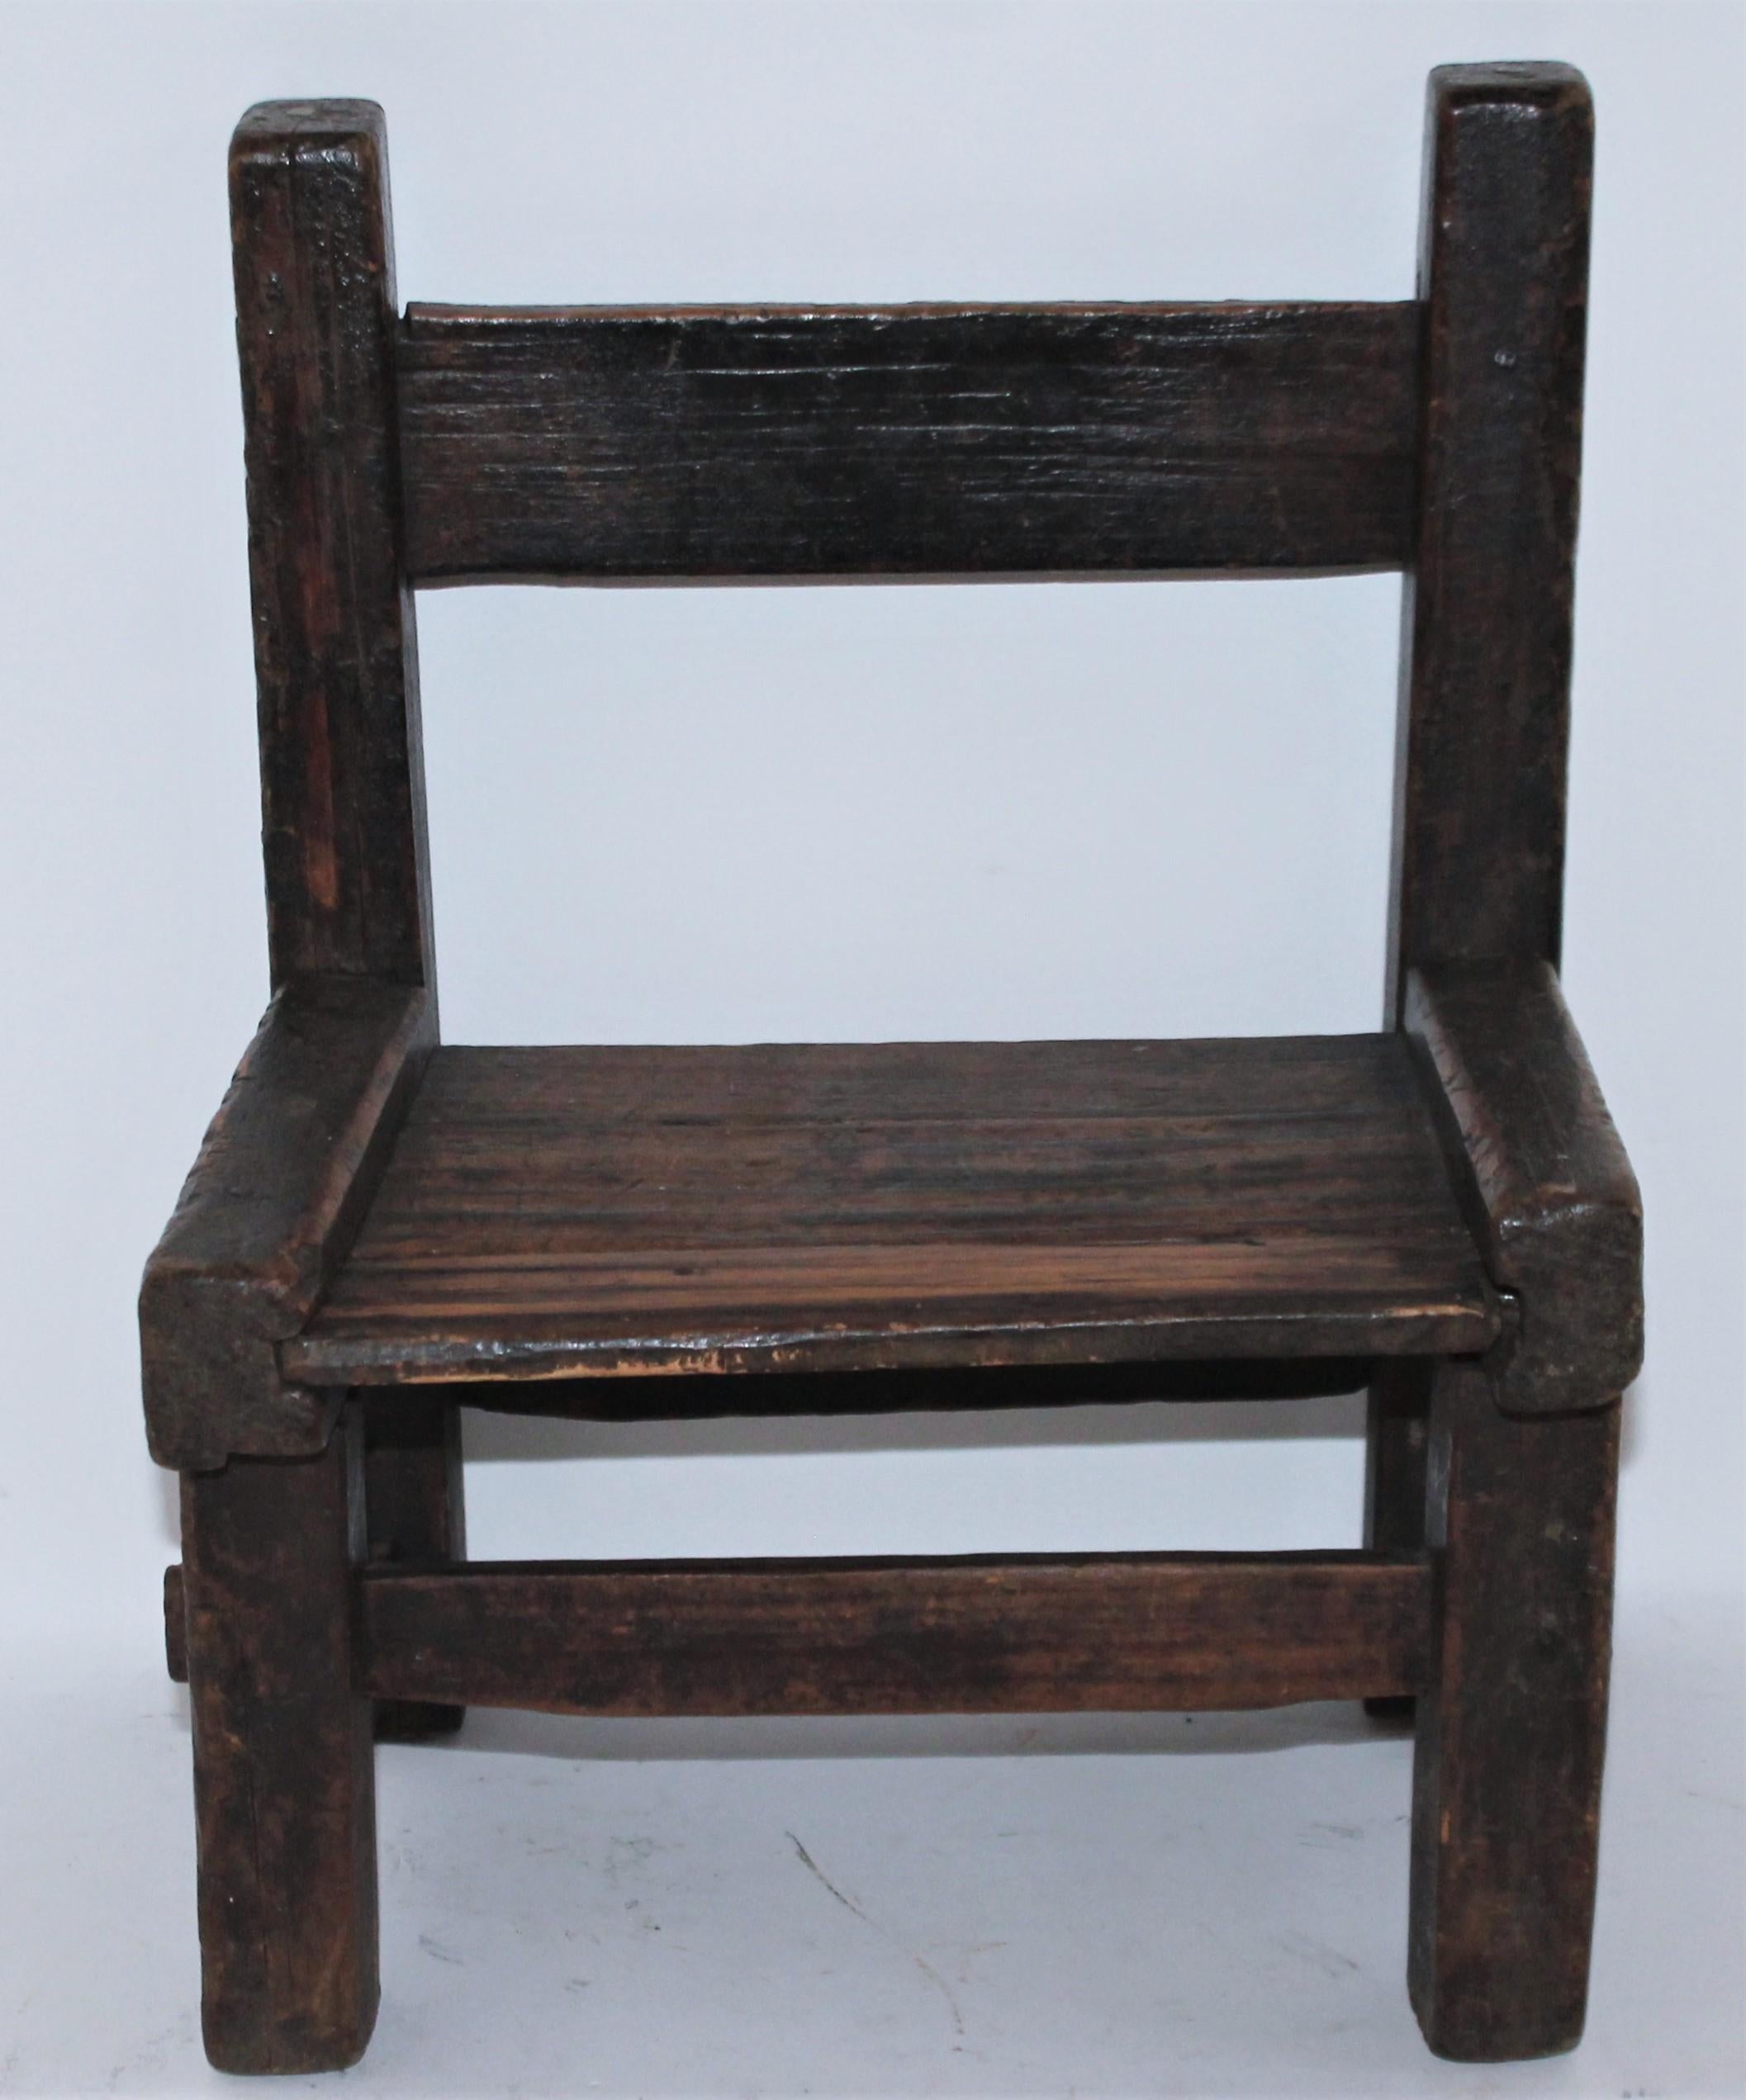 childs wooden chair